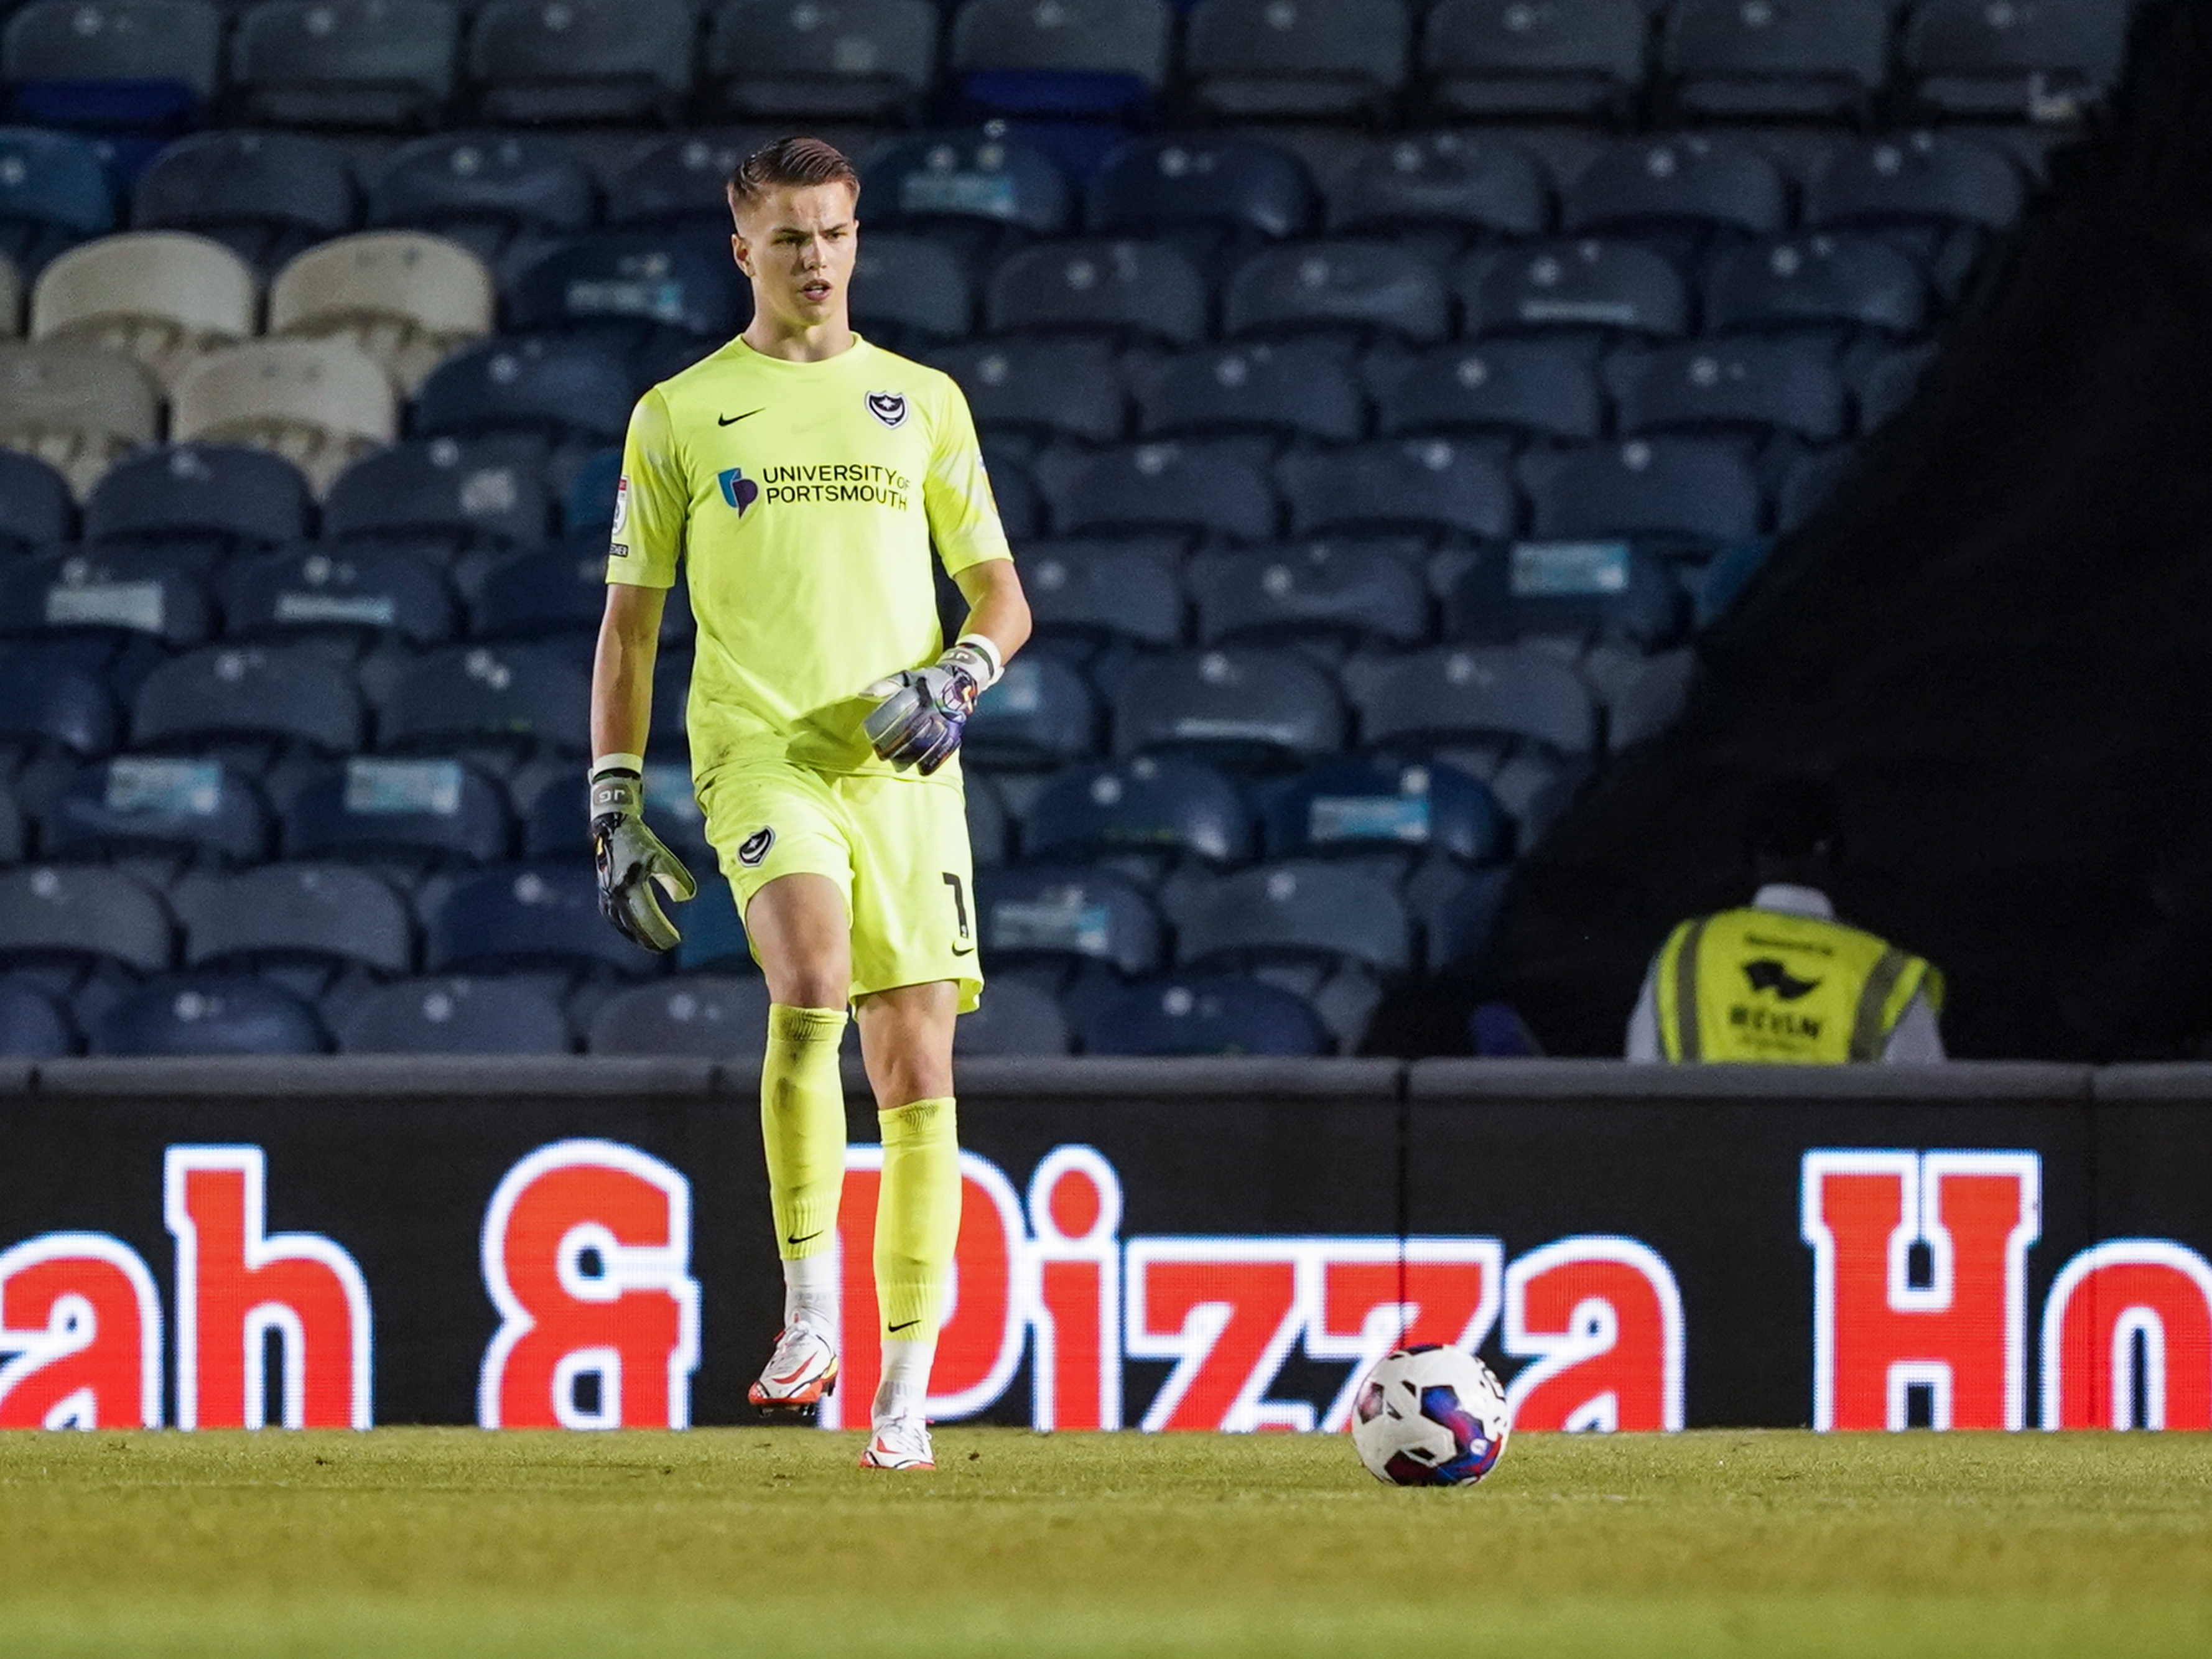 Albion keeper Josh Griffiths kicking the ball for loan club Portsmouth